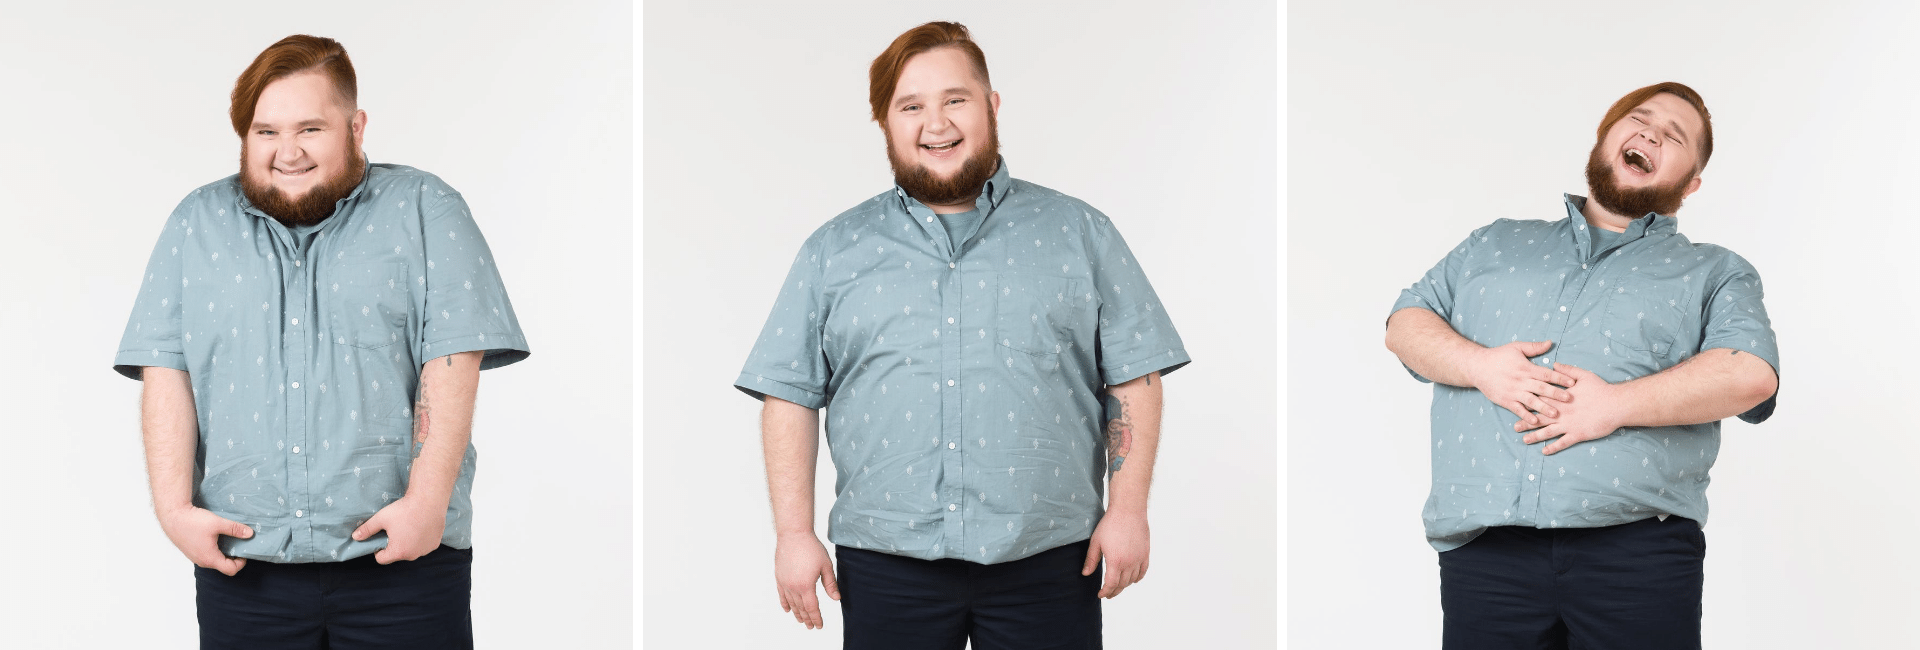 Choisir une chemise grande taille homme